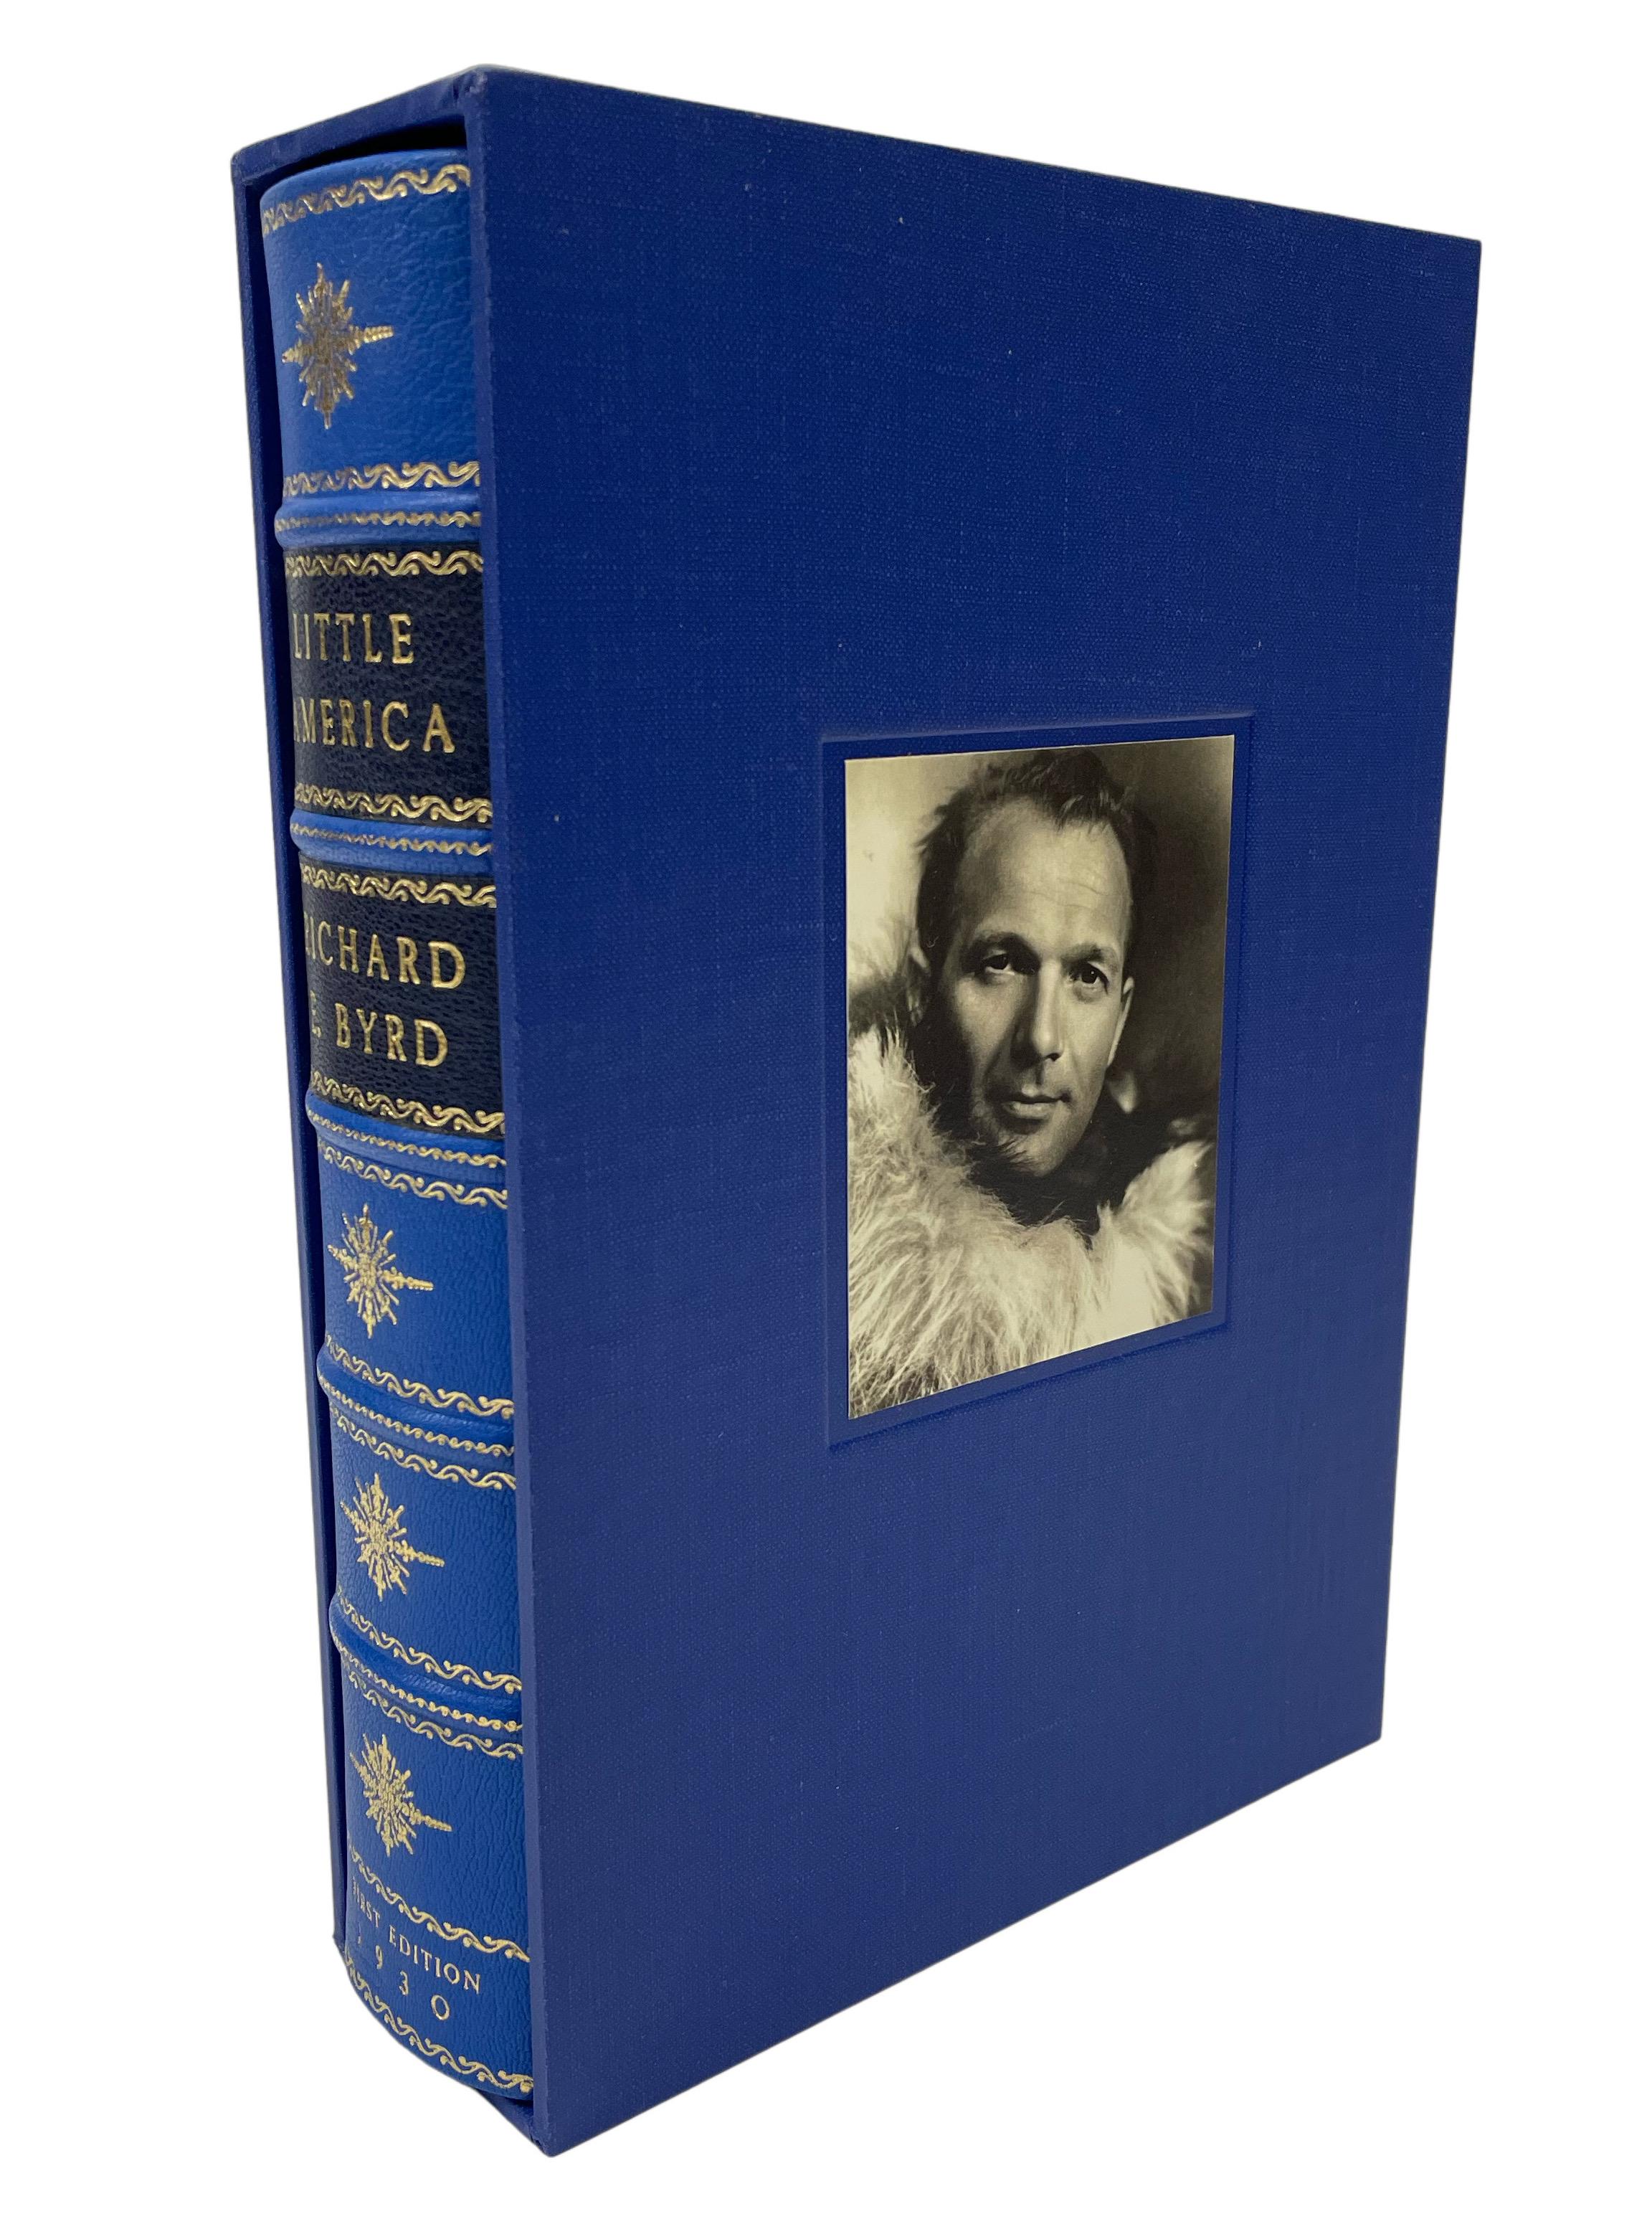 Byrd, Richard E., Little America: Aerial Exploration in the Antarctic, The Flight to the South Pole. New York: G.P. Putnam's Sons, 1930. First edition. Octavo. Presented in quarter royal blue Moroccan leather and cloth binding, with gilt titles and